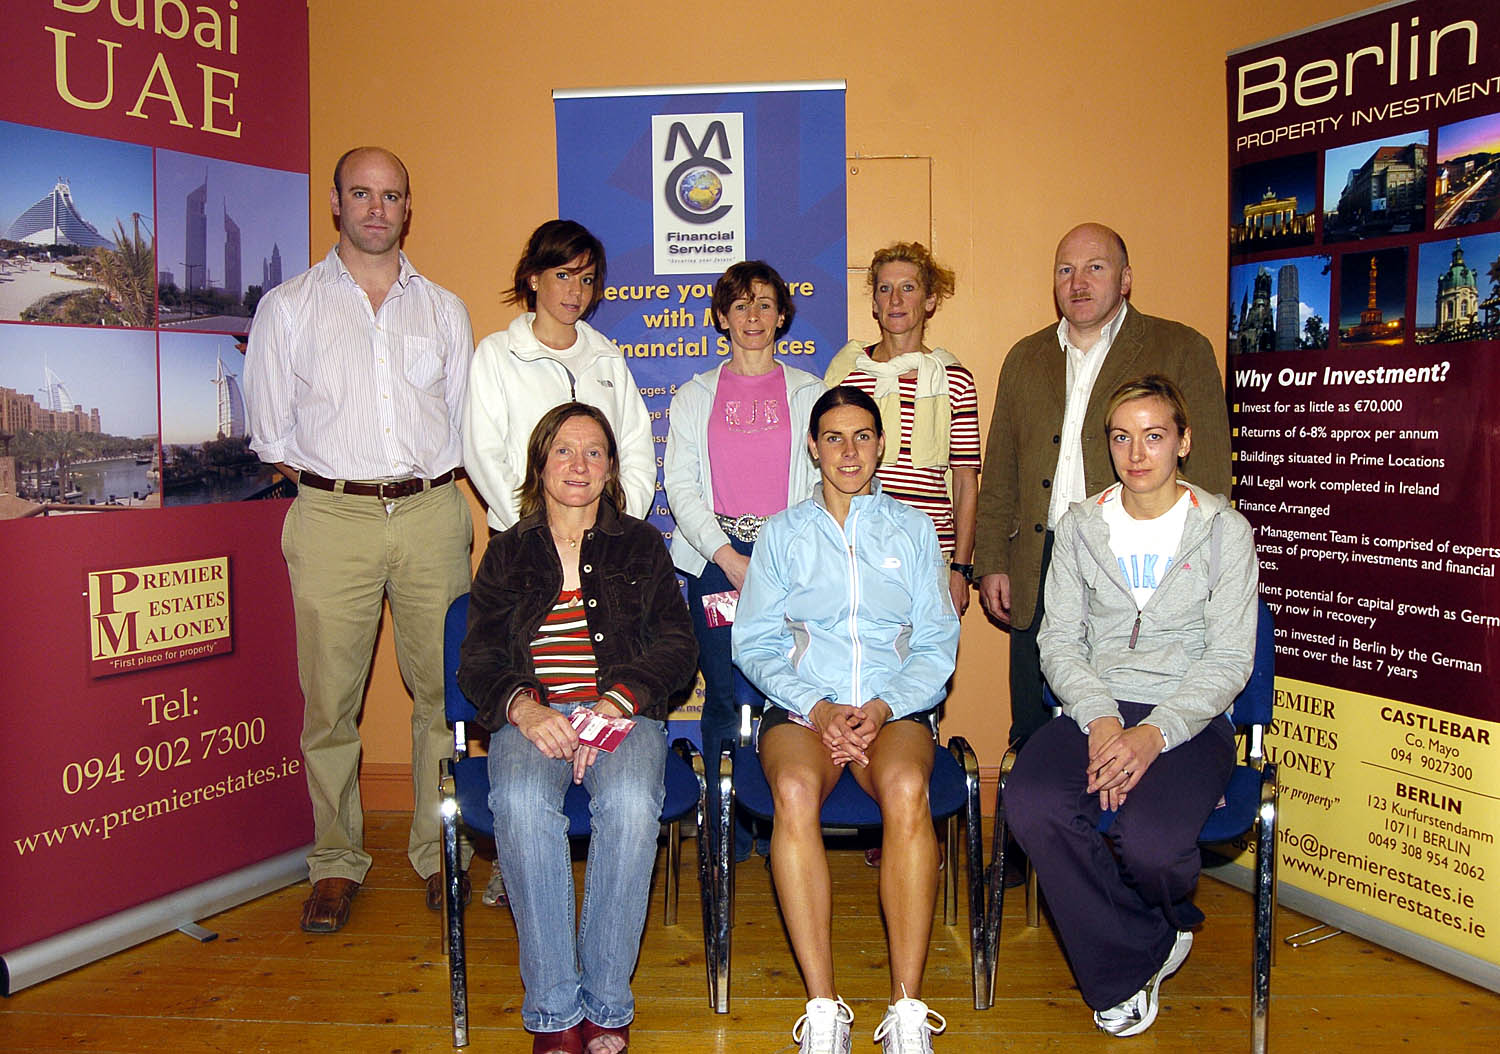 Balla 13th Annual 10K Road Race 2007, a group of winners Front L-R: Ann Lennon 2nd, Ladies Over 35 Mary Gleeson 1st Senior Ladies , Catherine Conway 3rd Senior Ladies. Back L-R: CliveCasey Premier Estates Maloney,(sponsor)  Nicola OKelly  1st Girls Over 18, Noreen McManamon Ladies Over 35, Ann Murray 6th Ladies Over 35, Tom Connolly Premier Estates Maloney( Sponsor) Photo  Ken Wright Photography 2007

